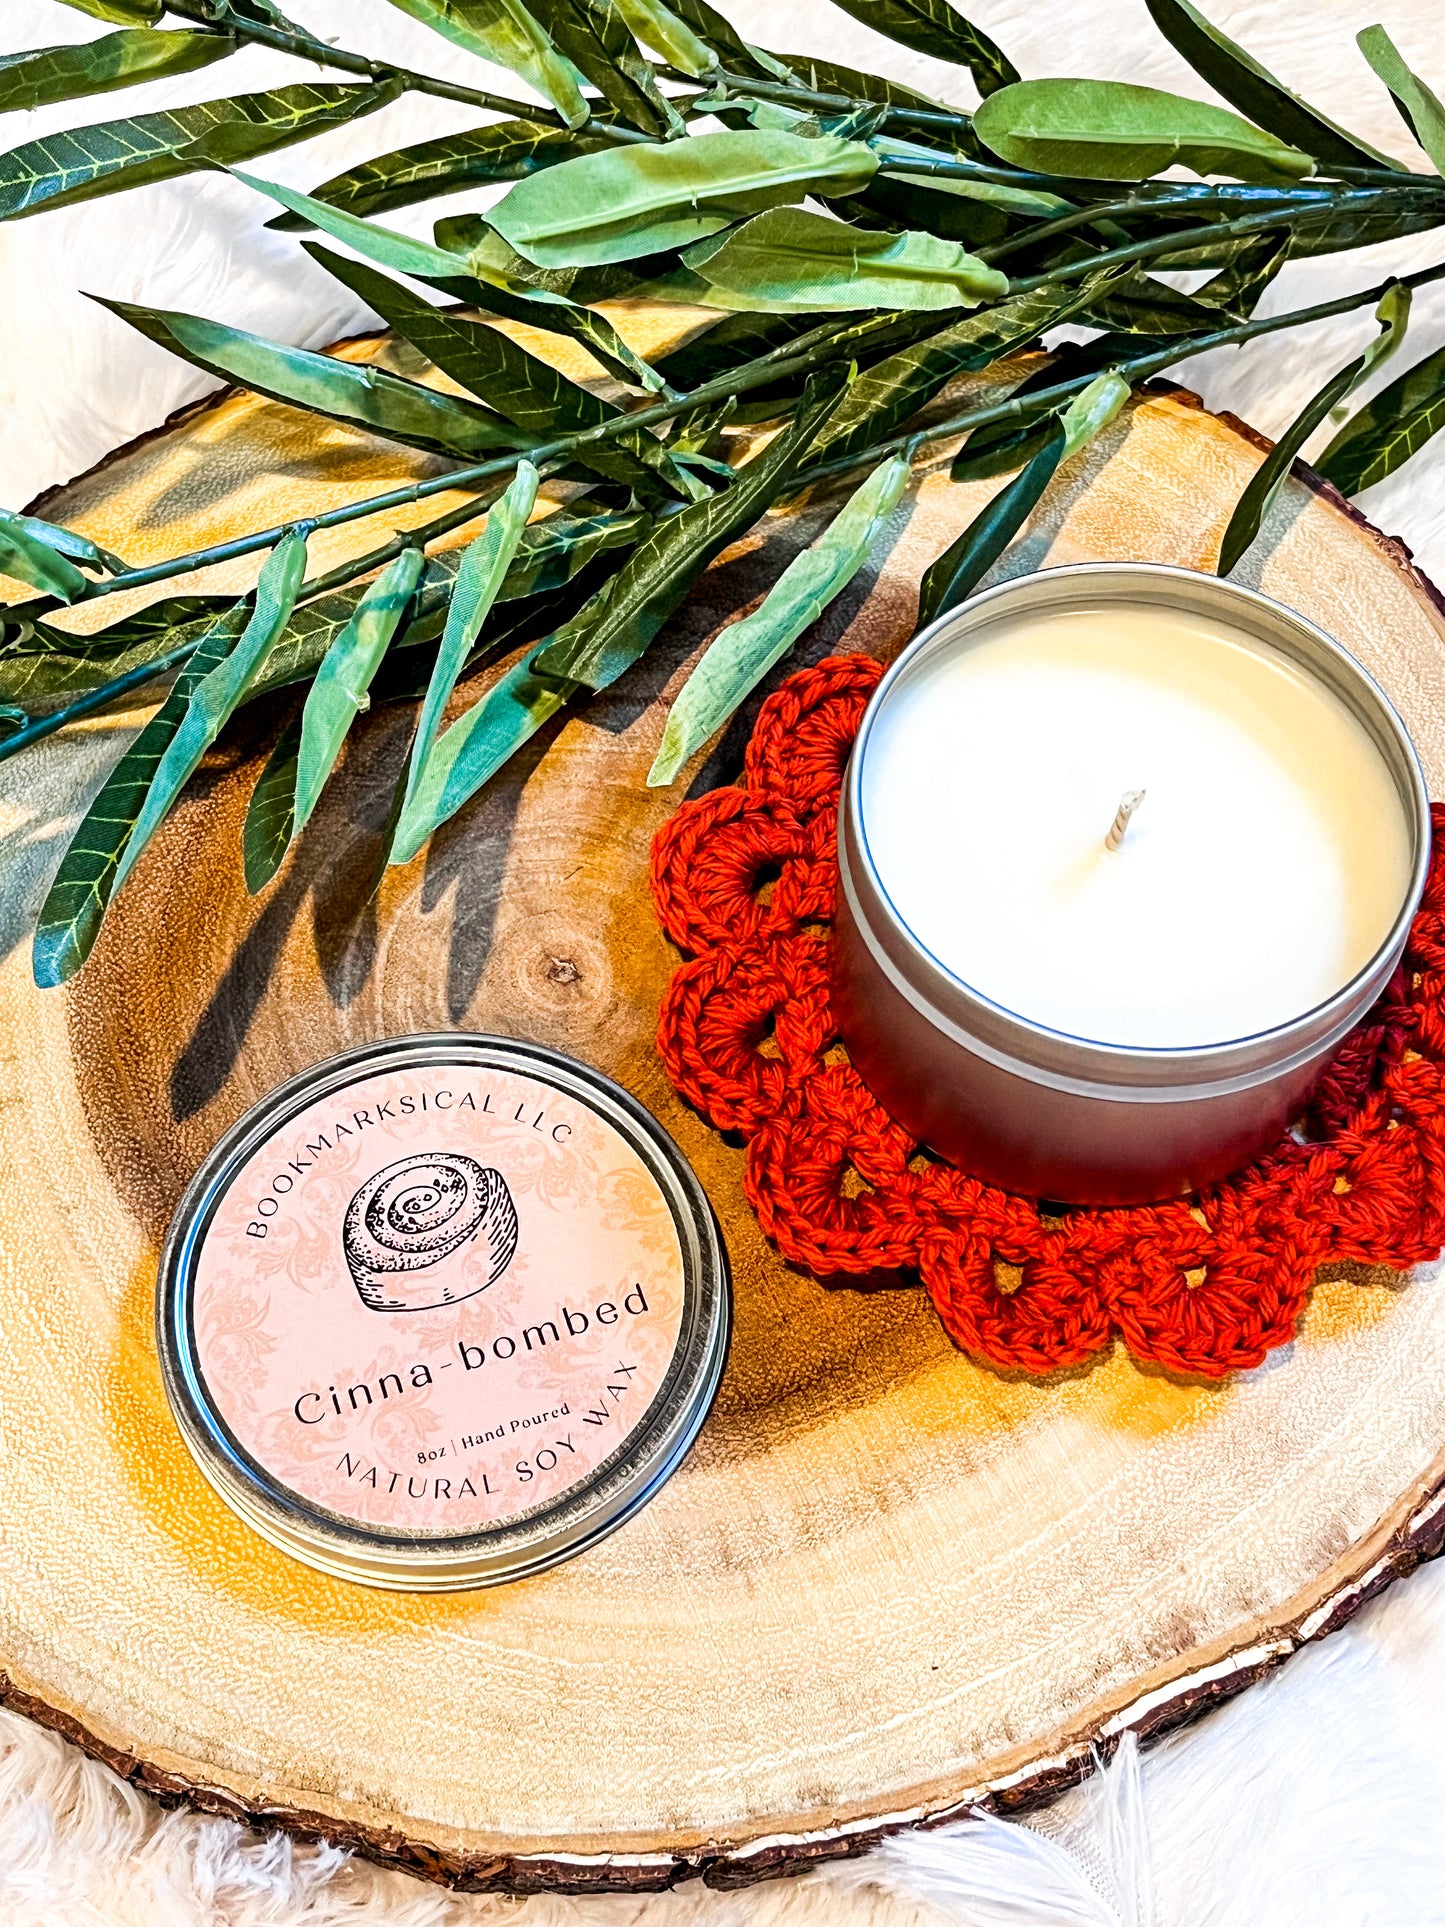 Cinna-bombed Soy Candle - Large